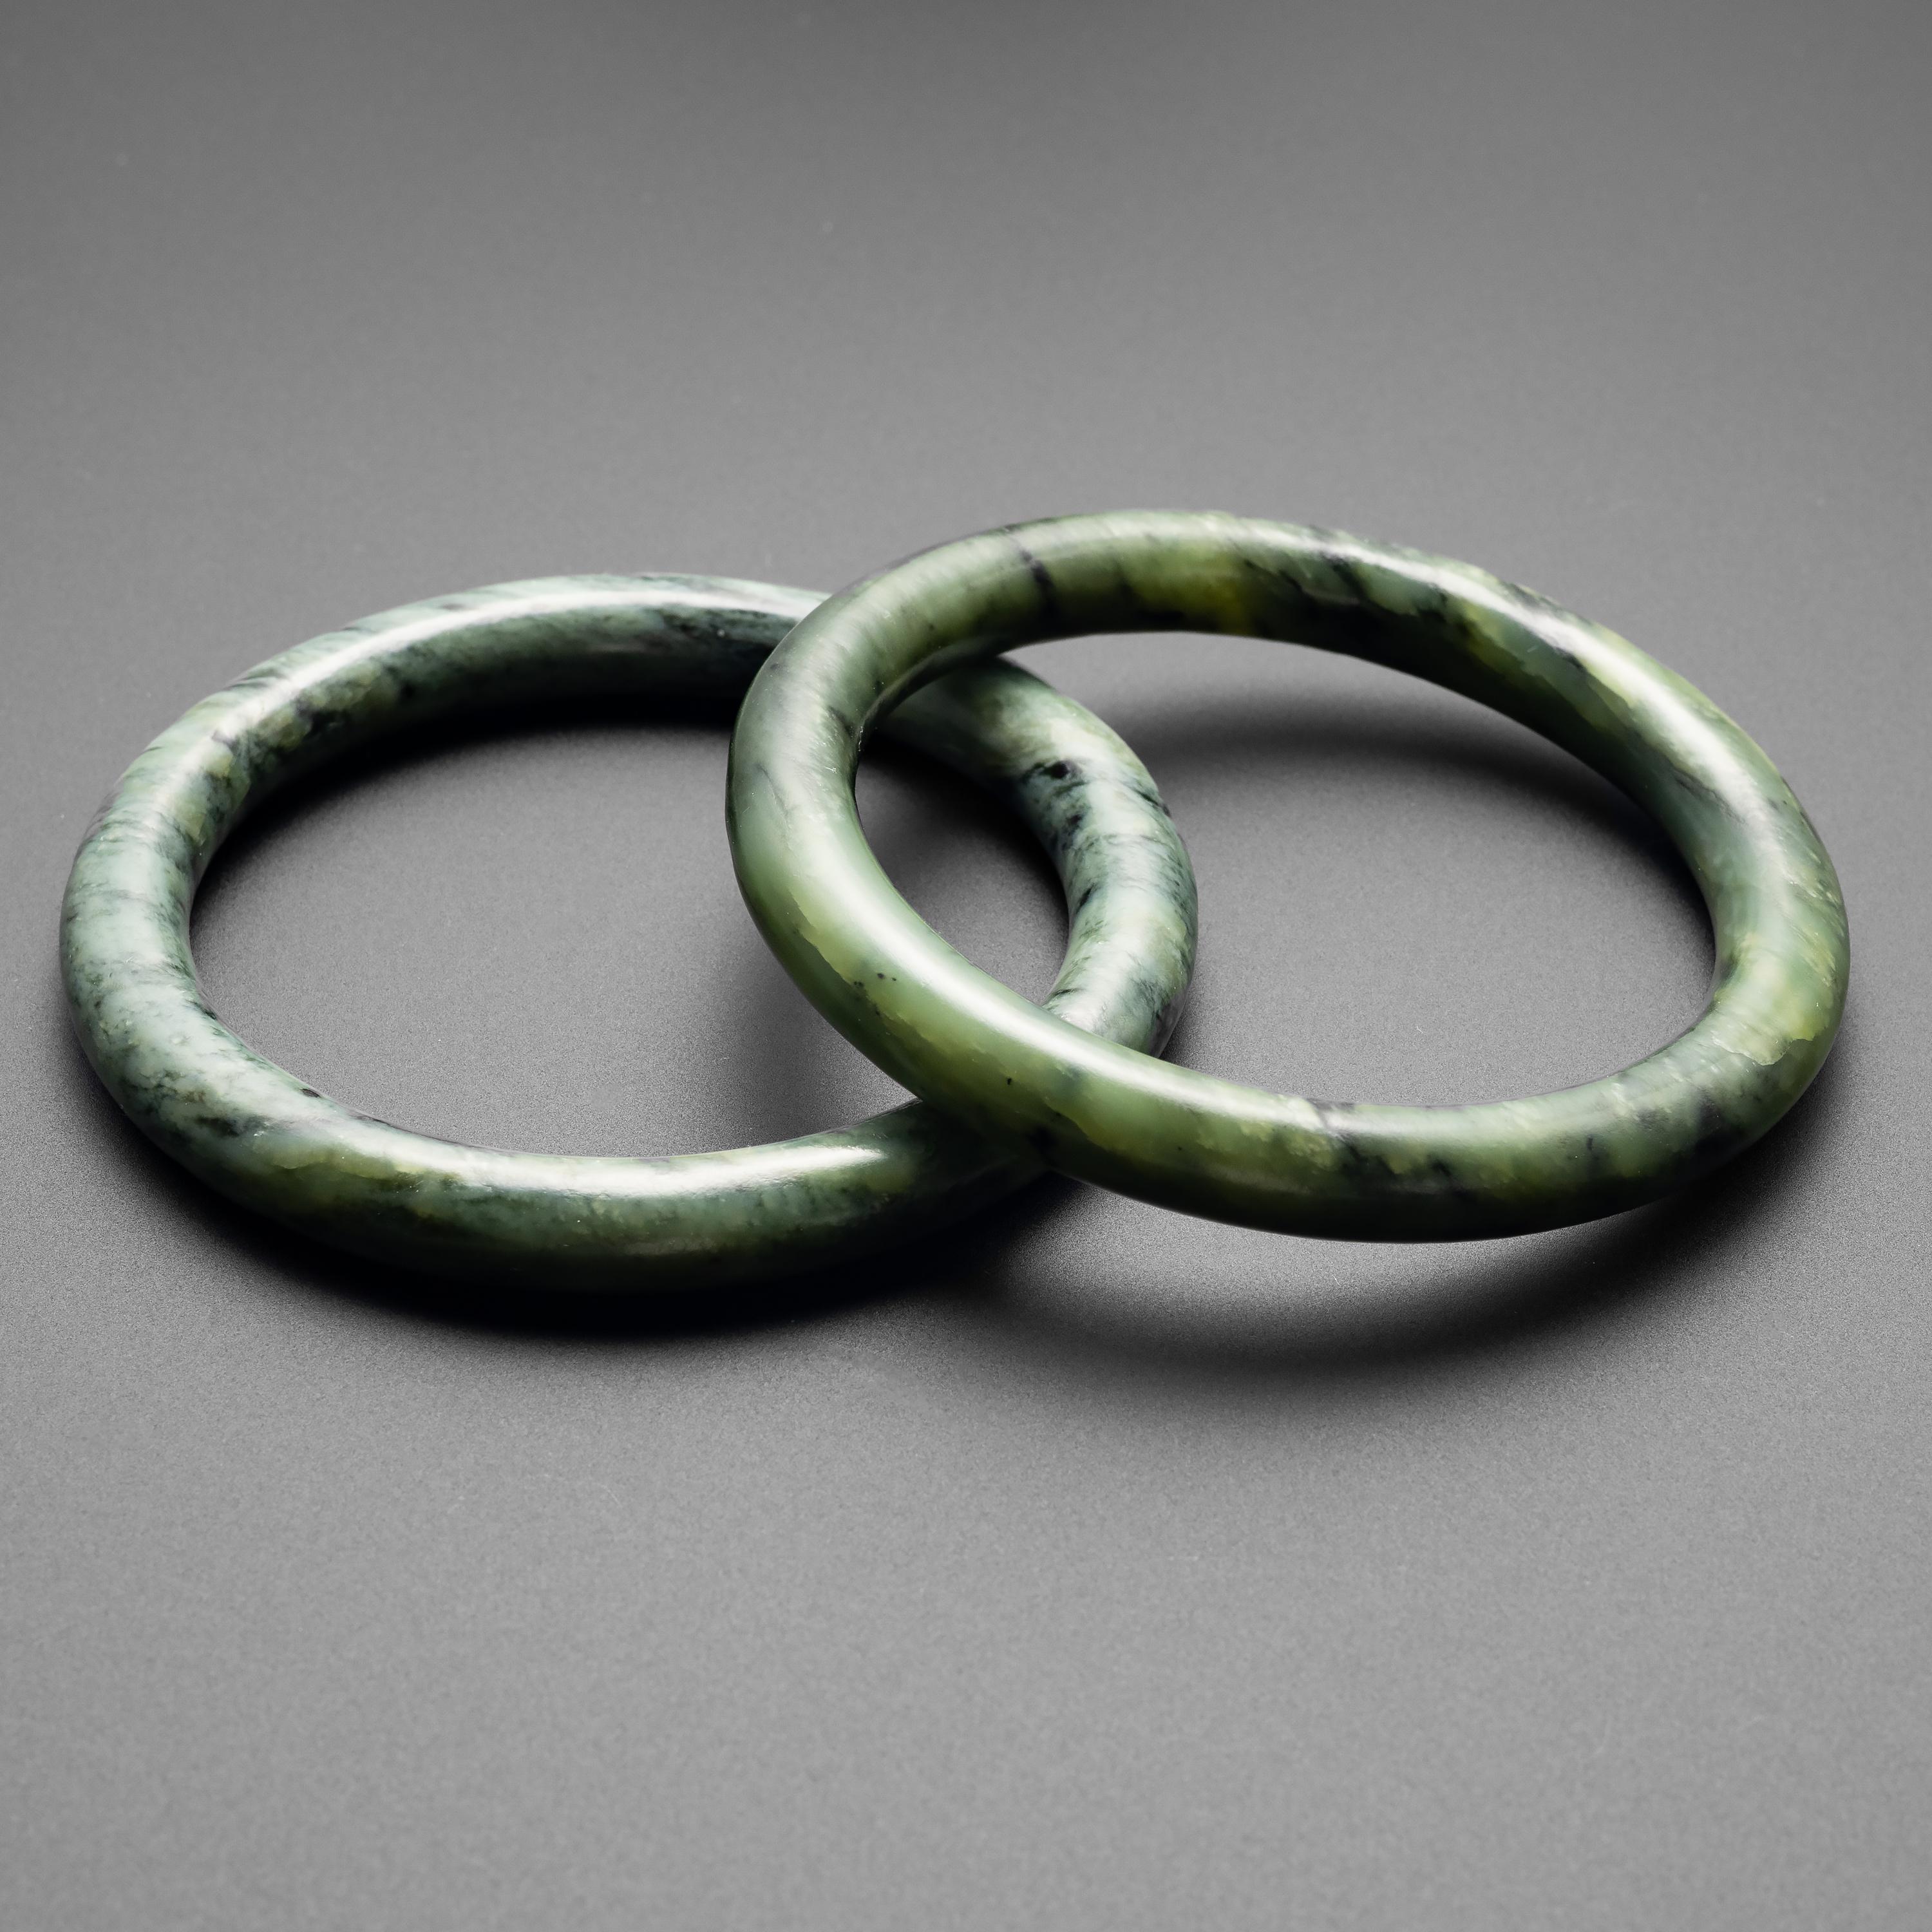 A pair of antique hand-carved and polished nephrite jade bangles dating to approximately 1900. I acquired these variegated green bangles as a pair and they do indeed appear to have been carved from the same piece of stone. Their pine-green coloring